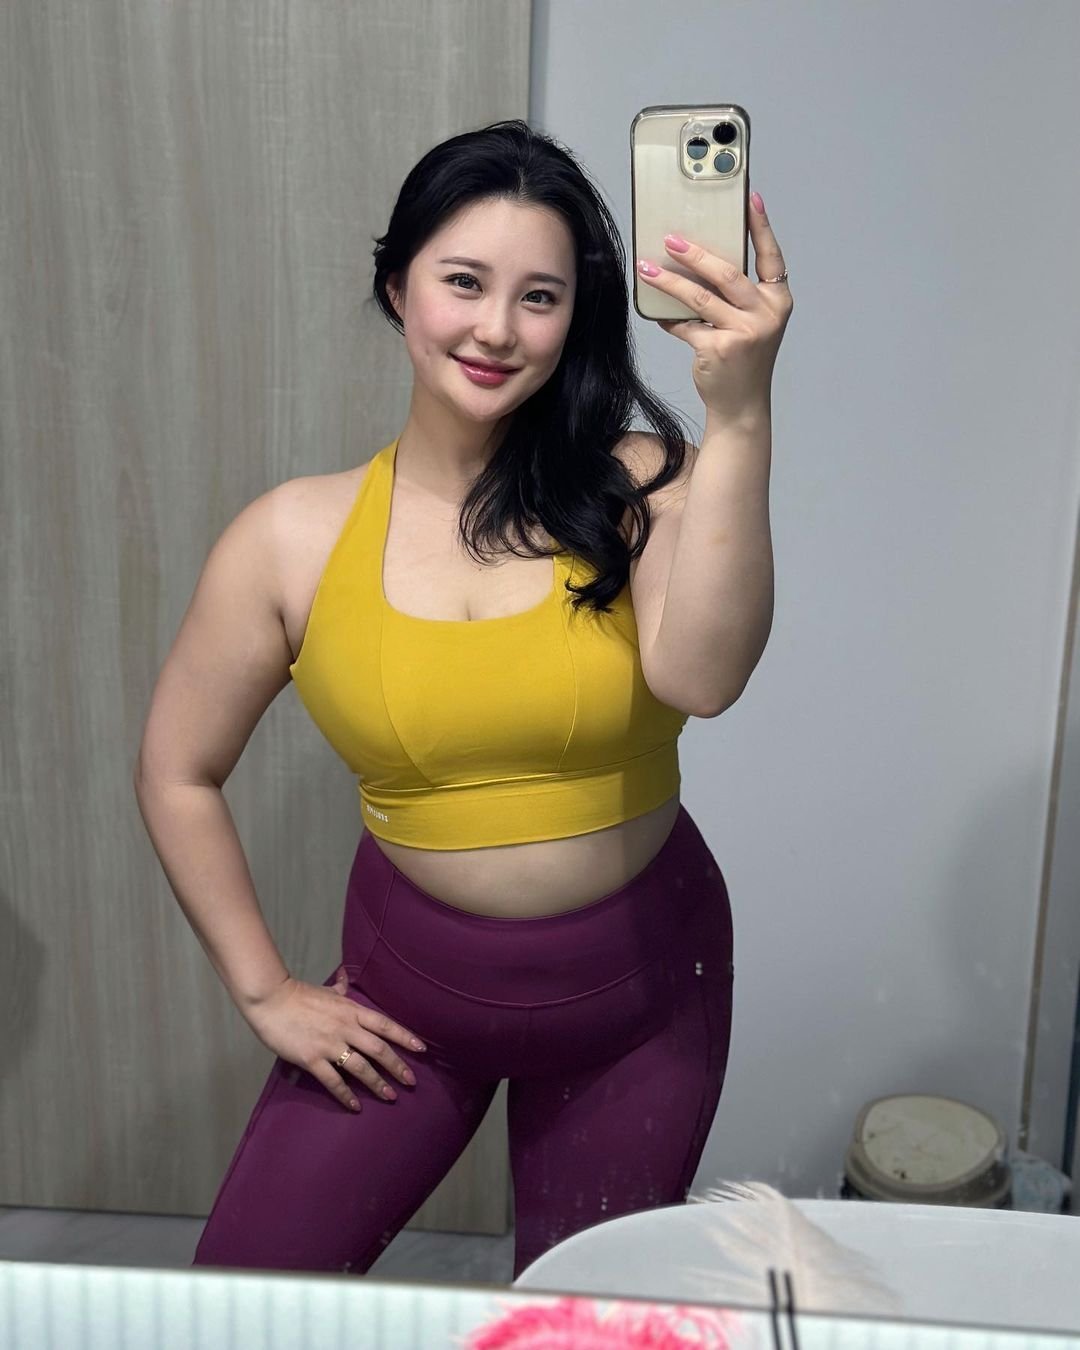 Workout Clothes Porn - Thicc Asian in workout clothes - Porn - EroMe